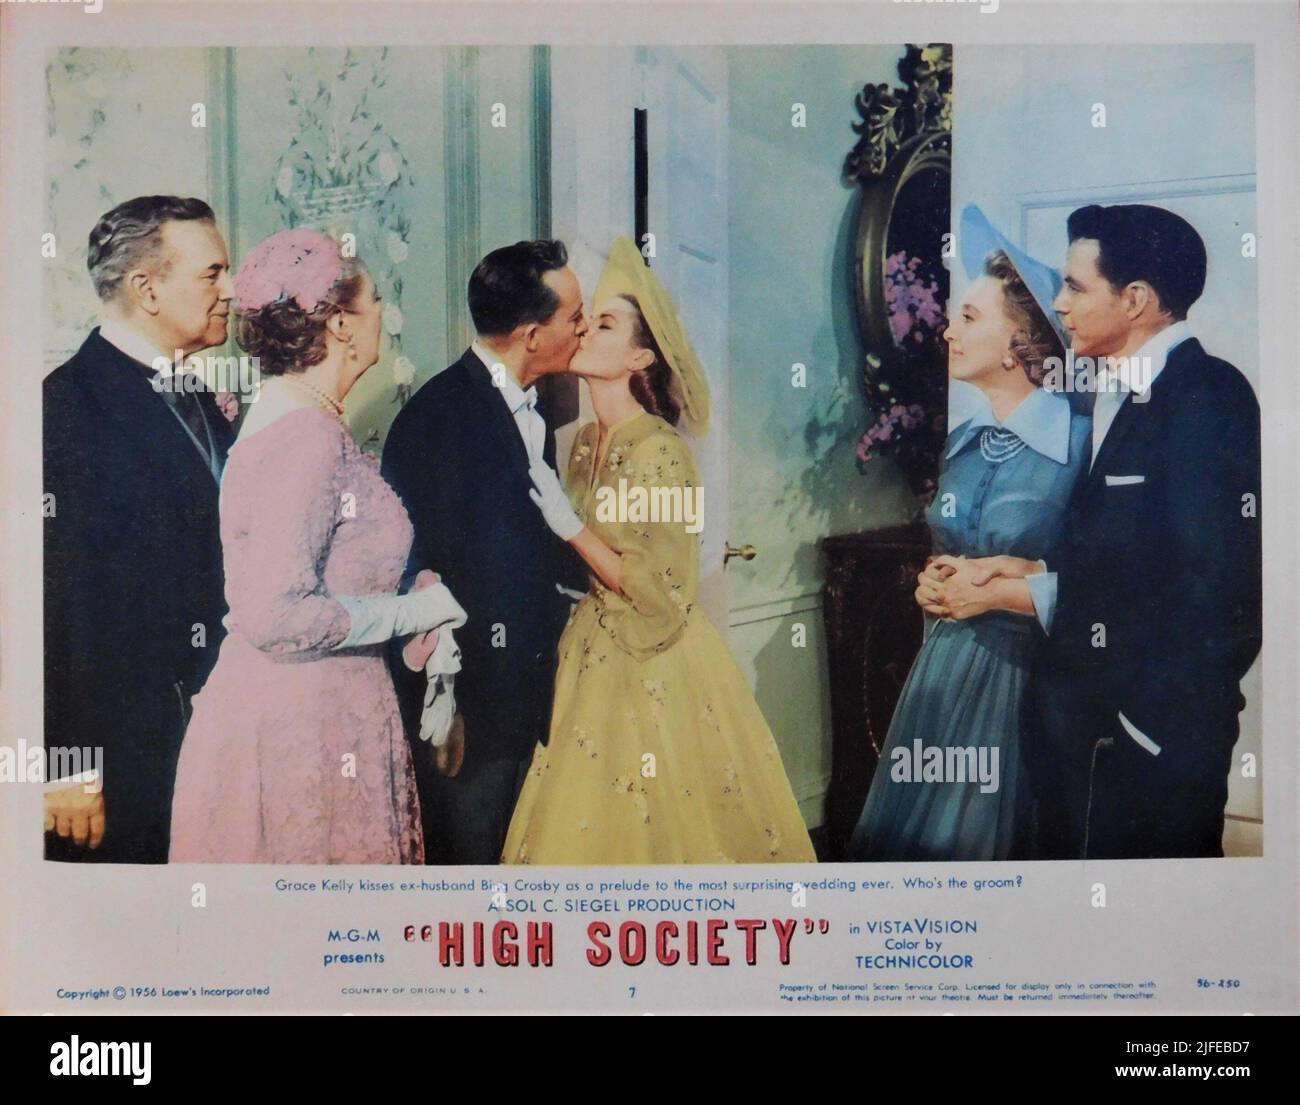 SIDNEY BLACKMER MARGALO GILMORE BING CROSBY GRACE KELLY CELESTE HOLM and FRANK SINATRA in HIGH SOCIETY 1956 director CHARLES WALTERS screenplay John Patrick from the play The Philadelphia Story by Philip Barry music and lyrics Cole Porter Sol C. Siegel Productions / Bing Crosby Productions / Metro Goldwyn Mayer Stock Photo